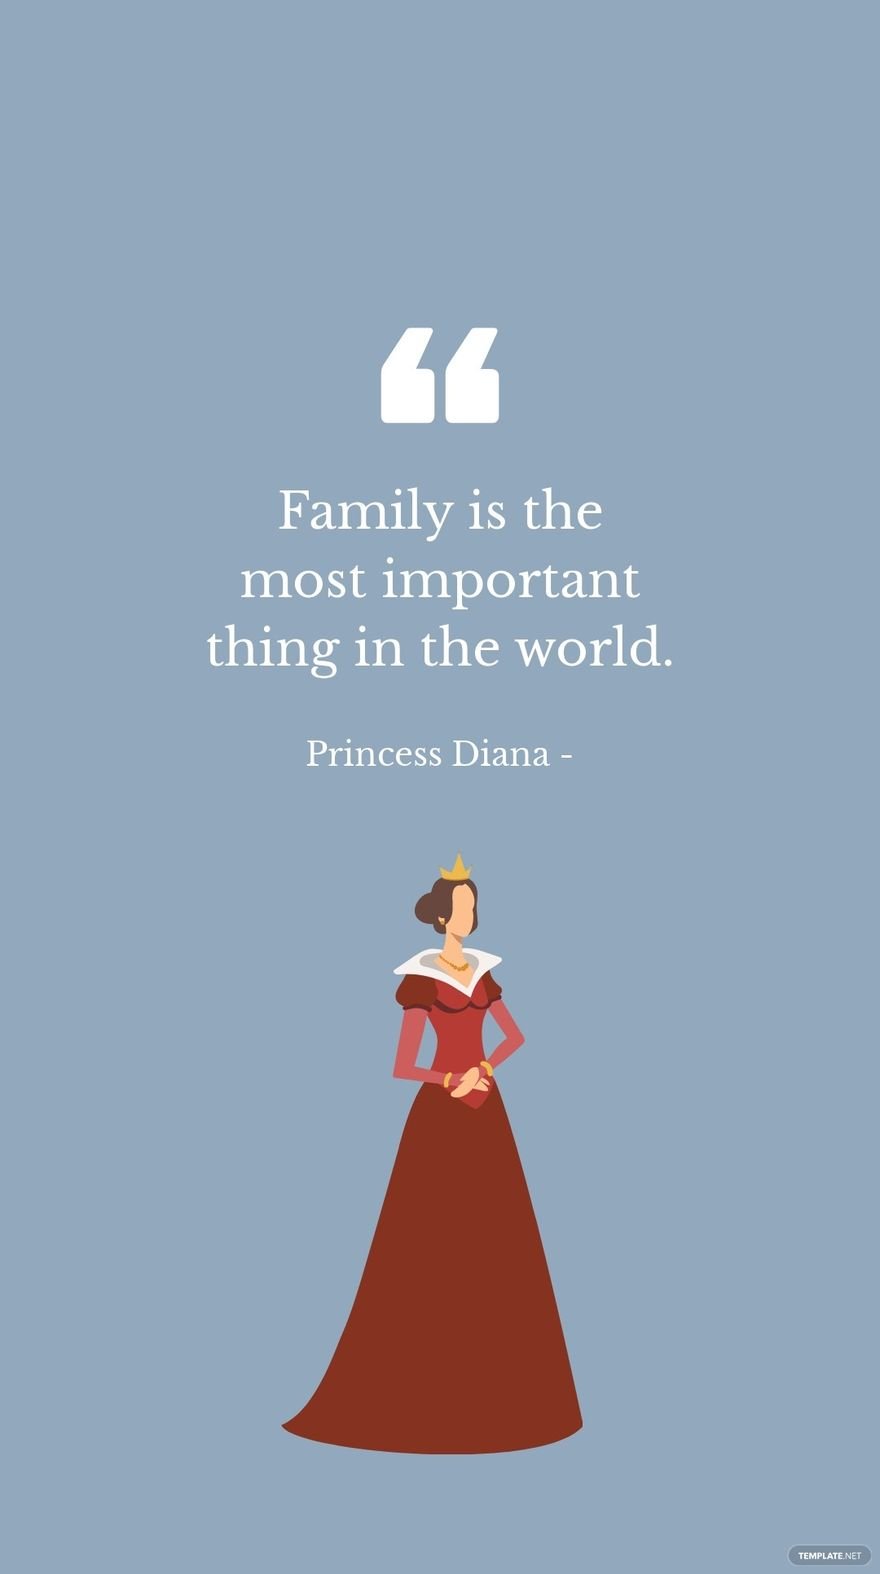 Free Princess Diana - Family is the most important thing in the world. in JPG